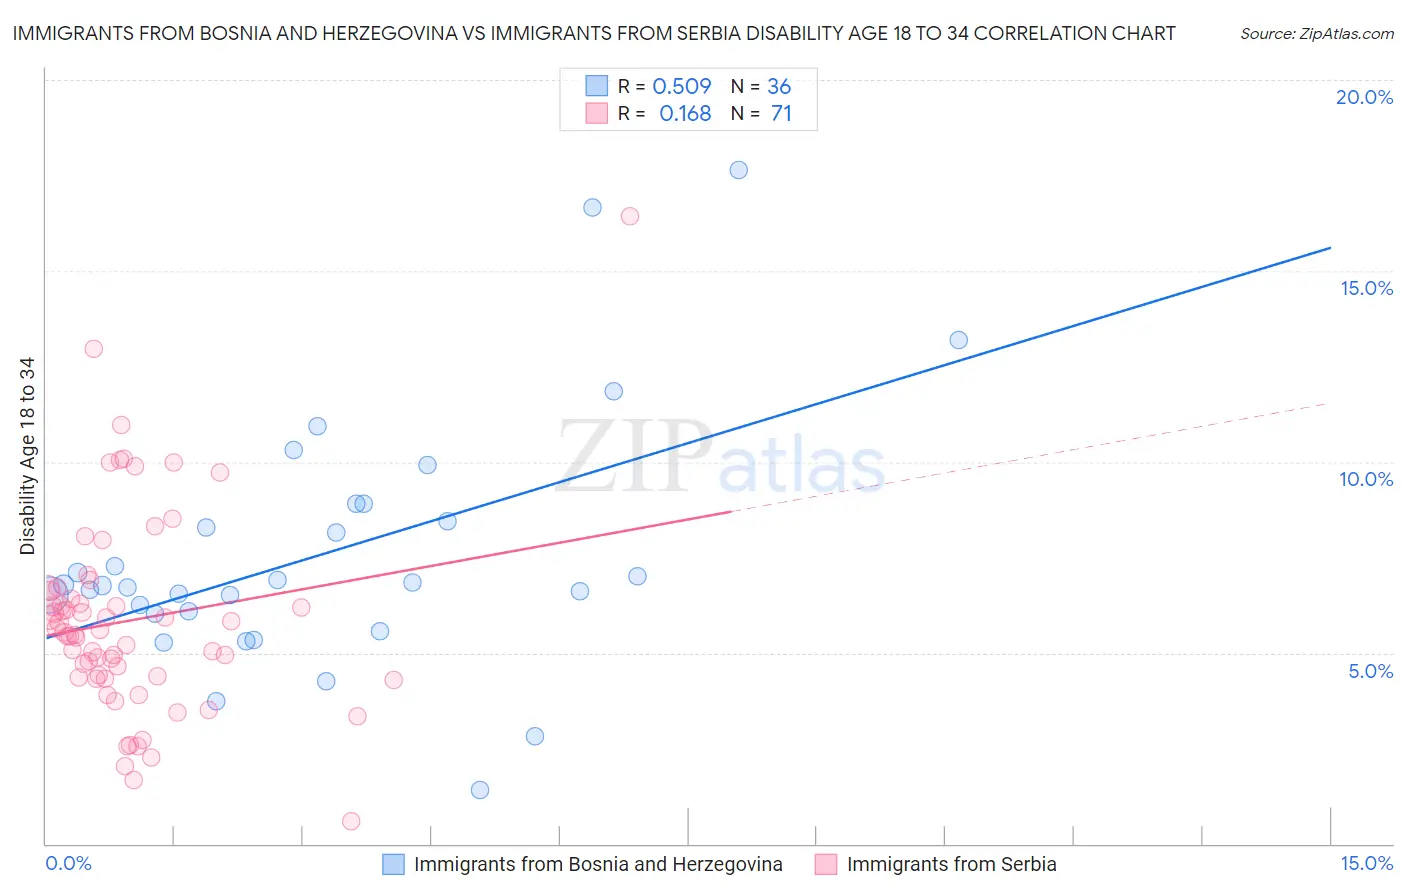 Immigrants from Bosnia and Herzegovina vs Immigrants from Serbia Disability Age 18 to 34